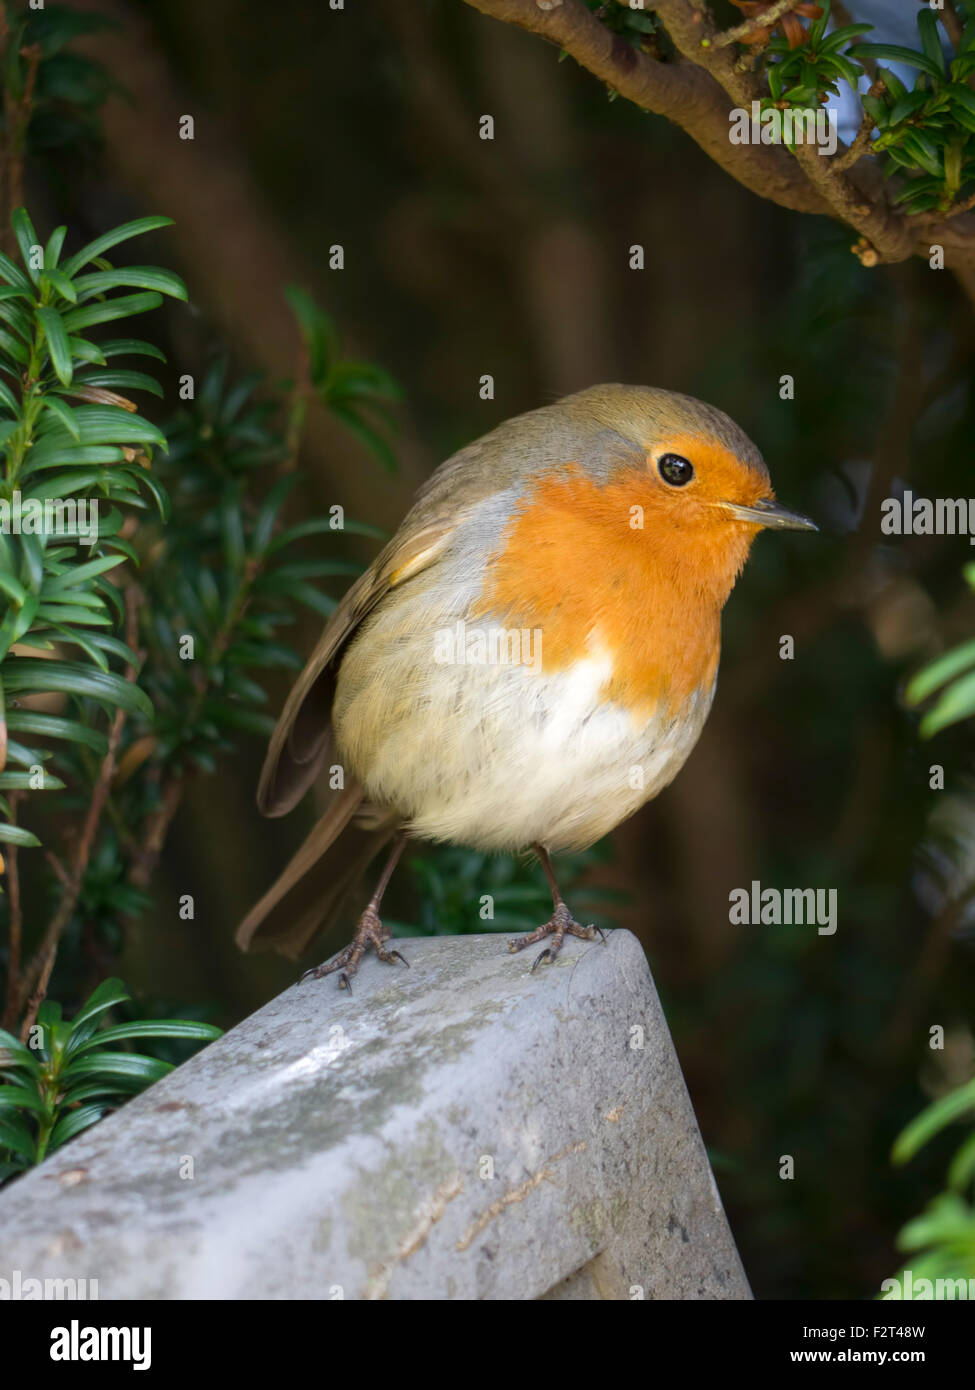 A bird seen mostly in the Winter and particularly at Christmas the popular Robin Redbreast. Stock Photo